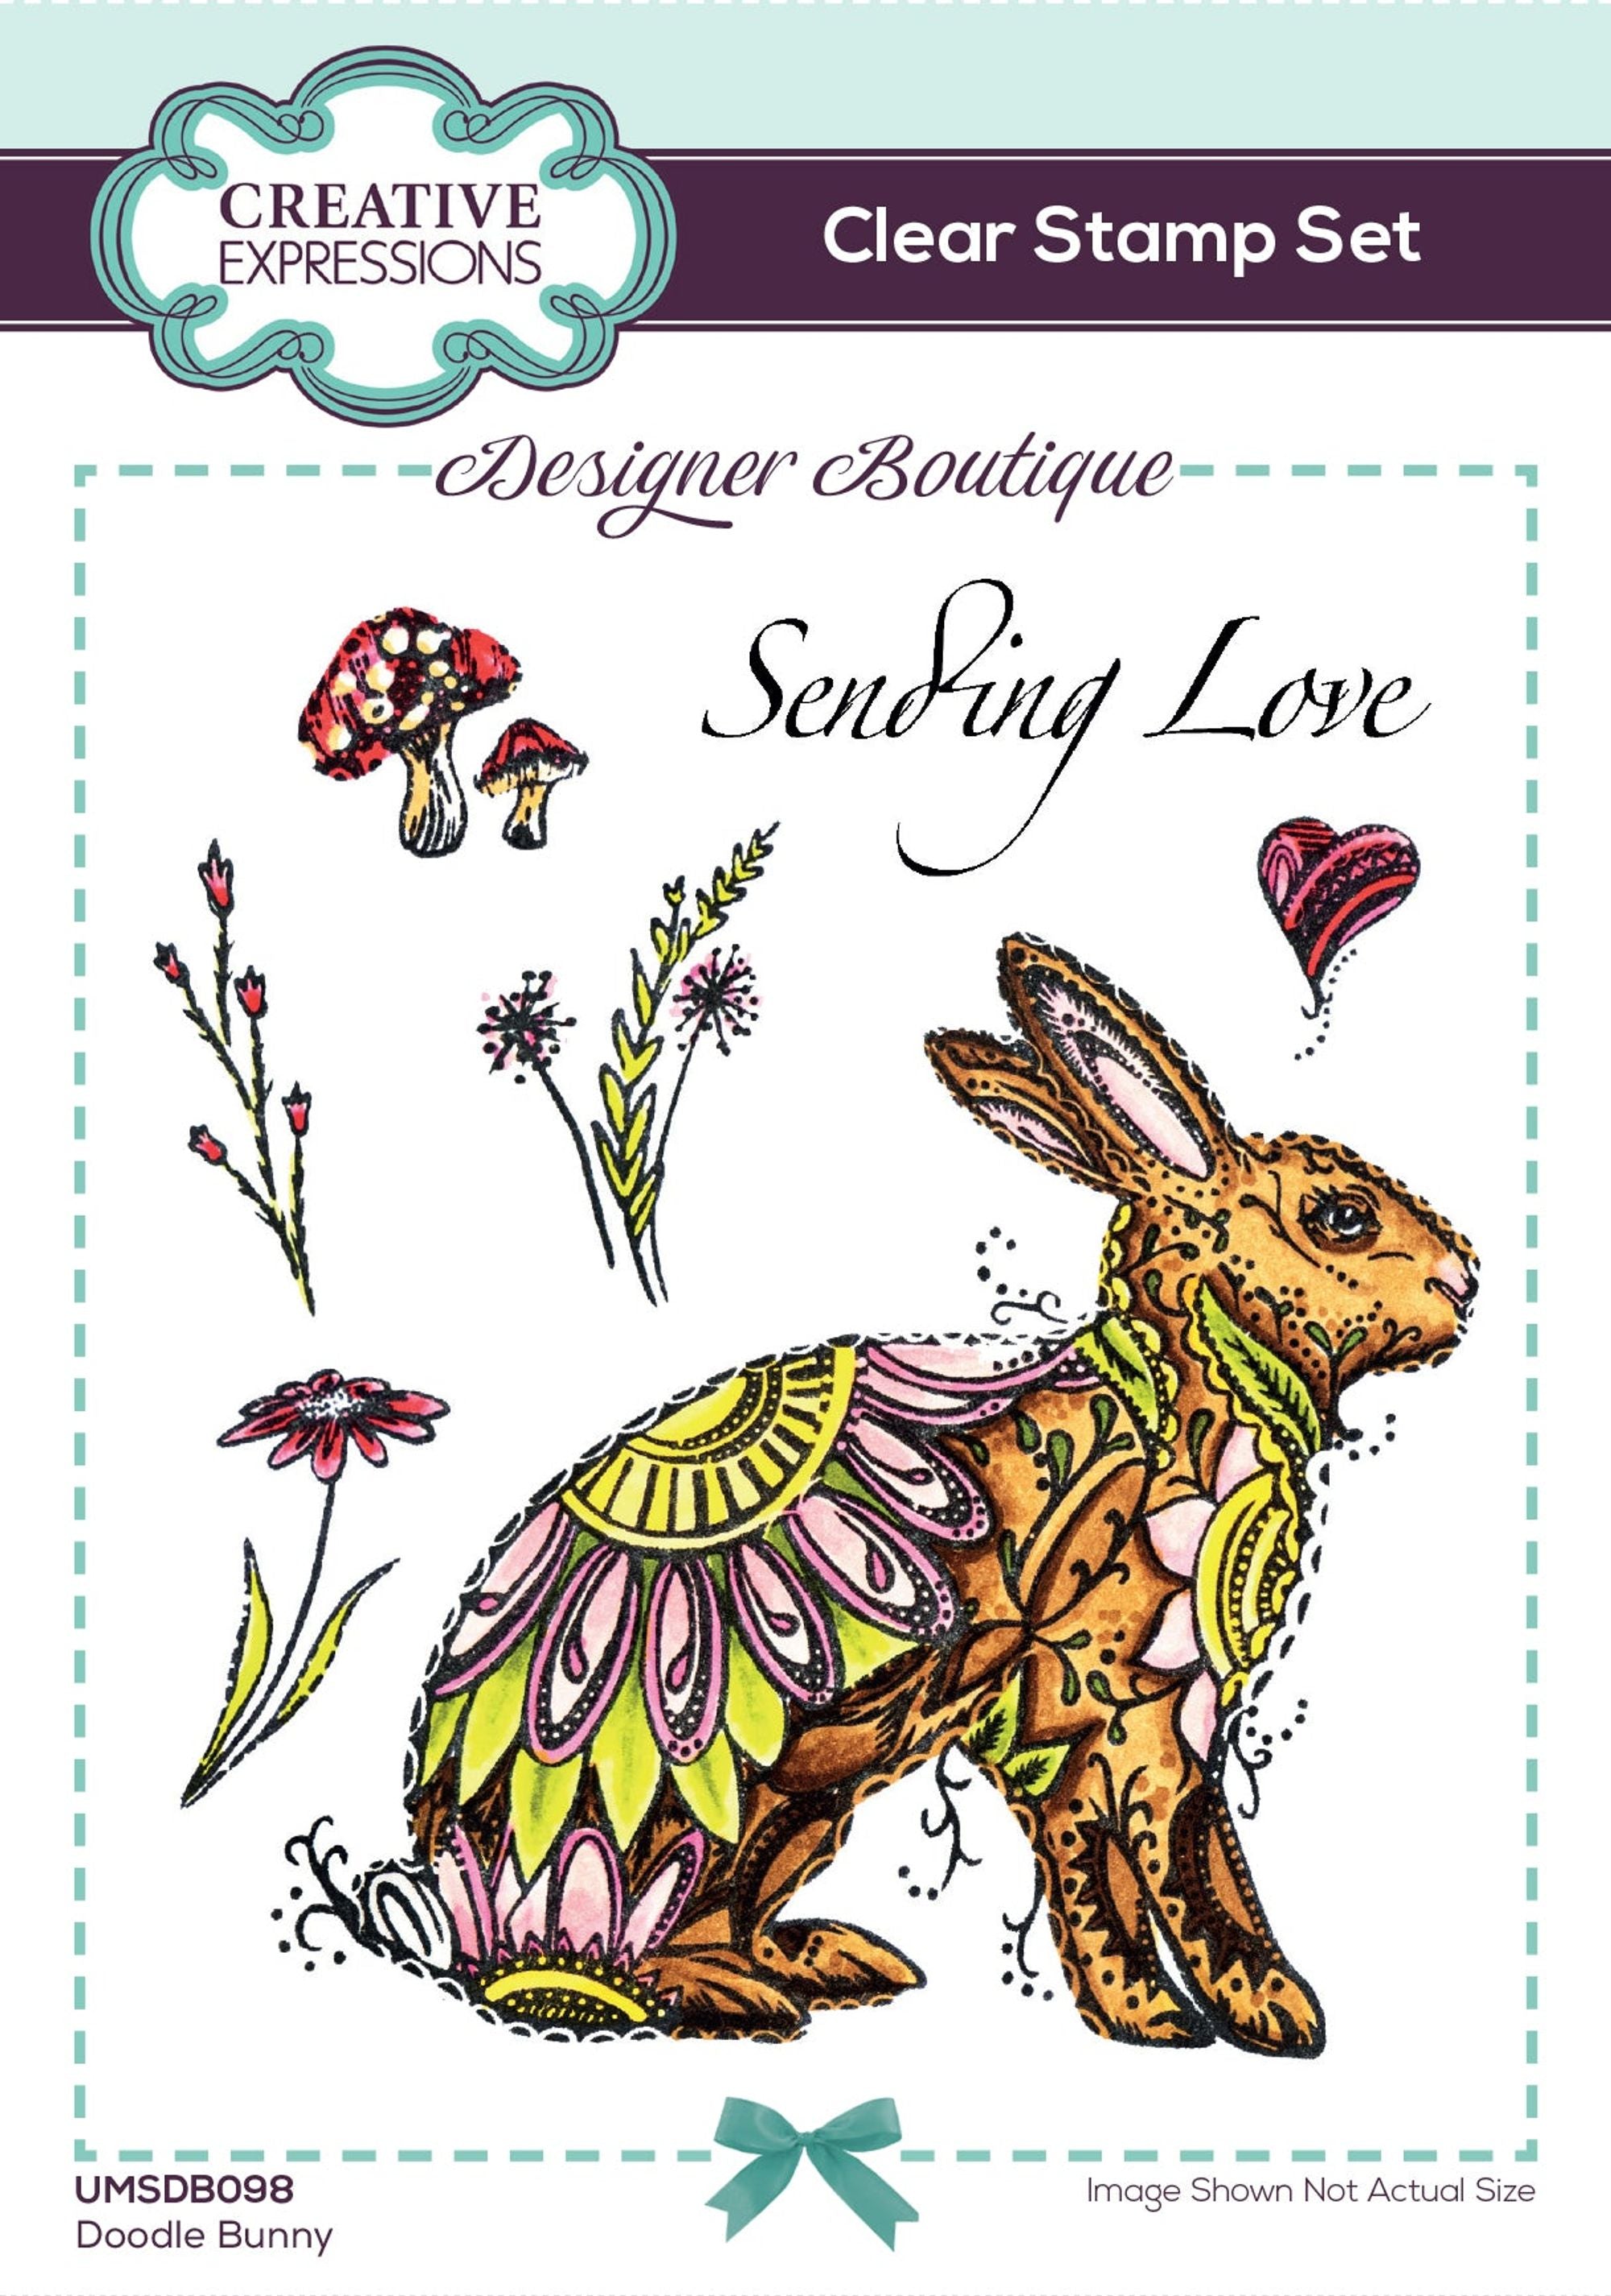 Creative Expressions Designer Boutique Doodle Bunny 6 in x 4 in Clear Stamp Set